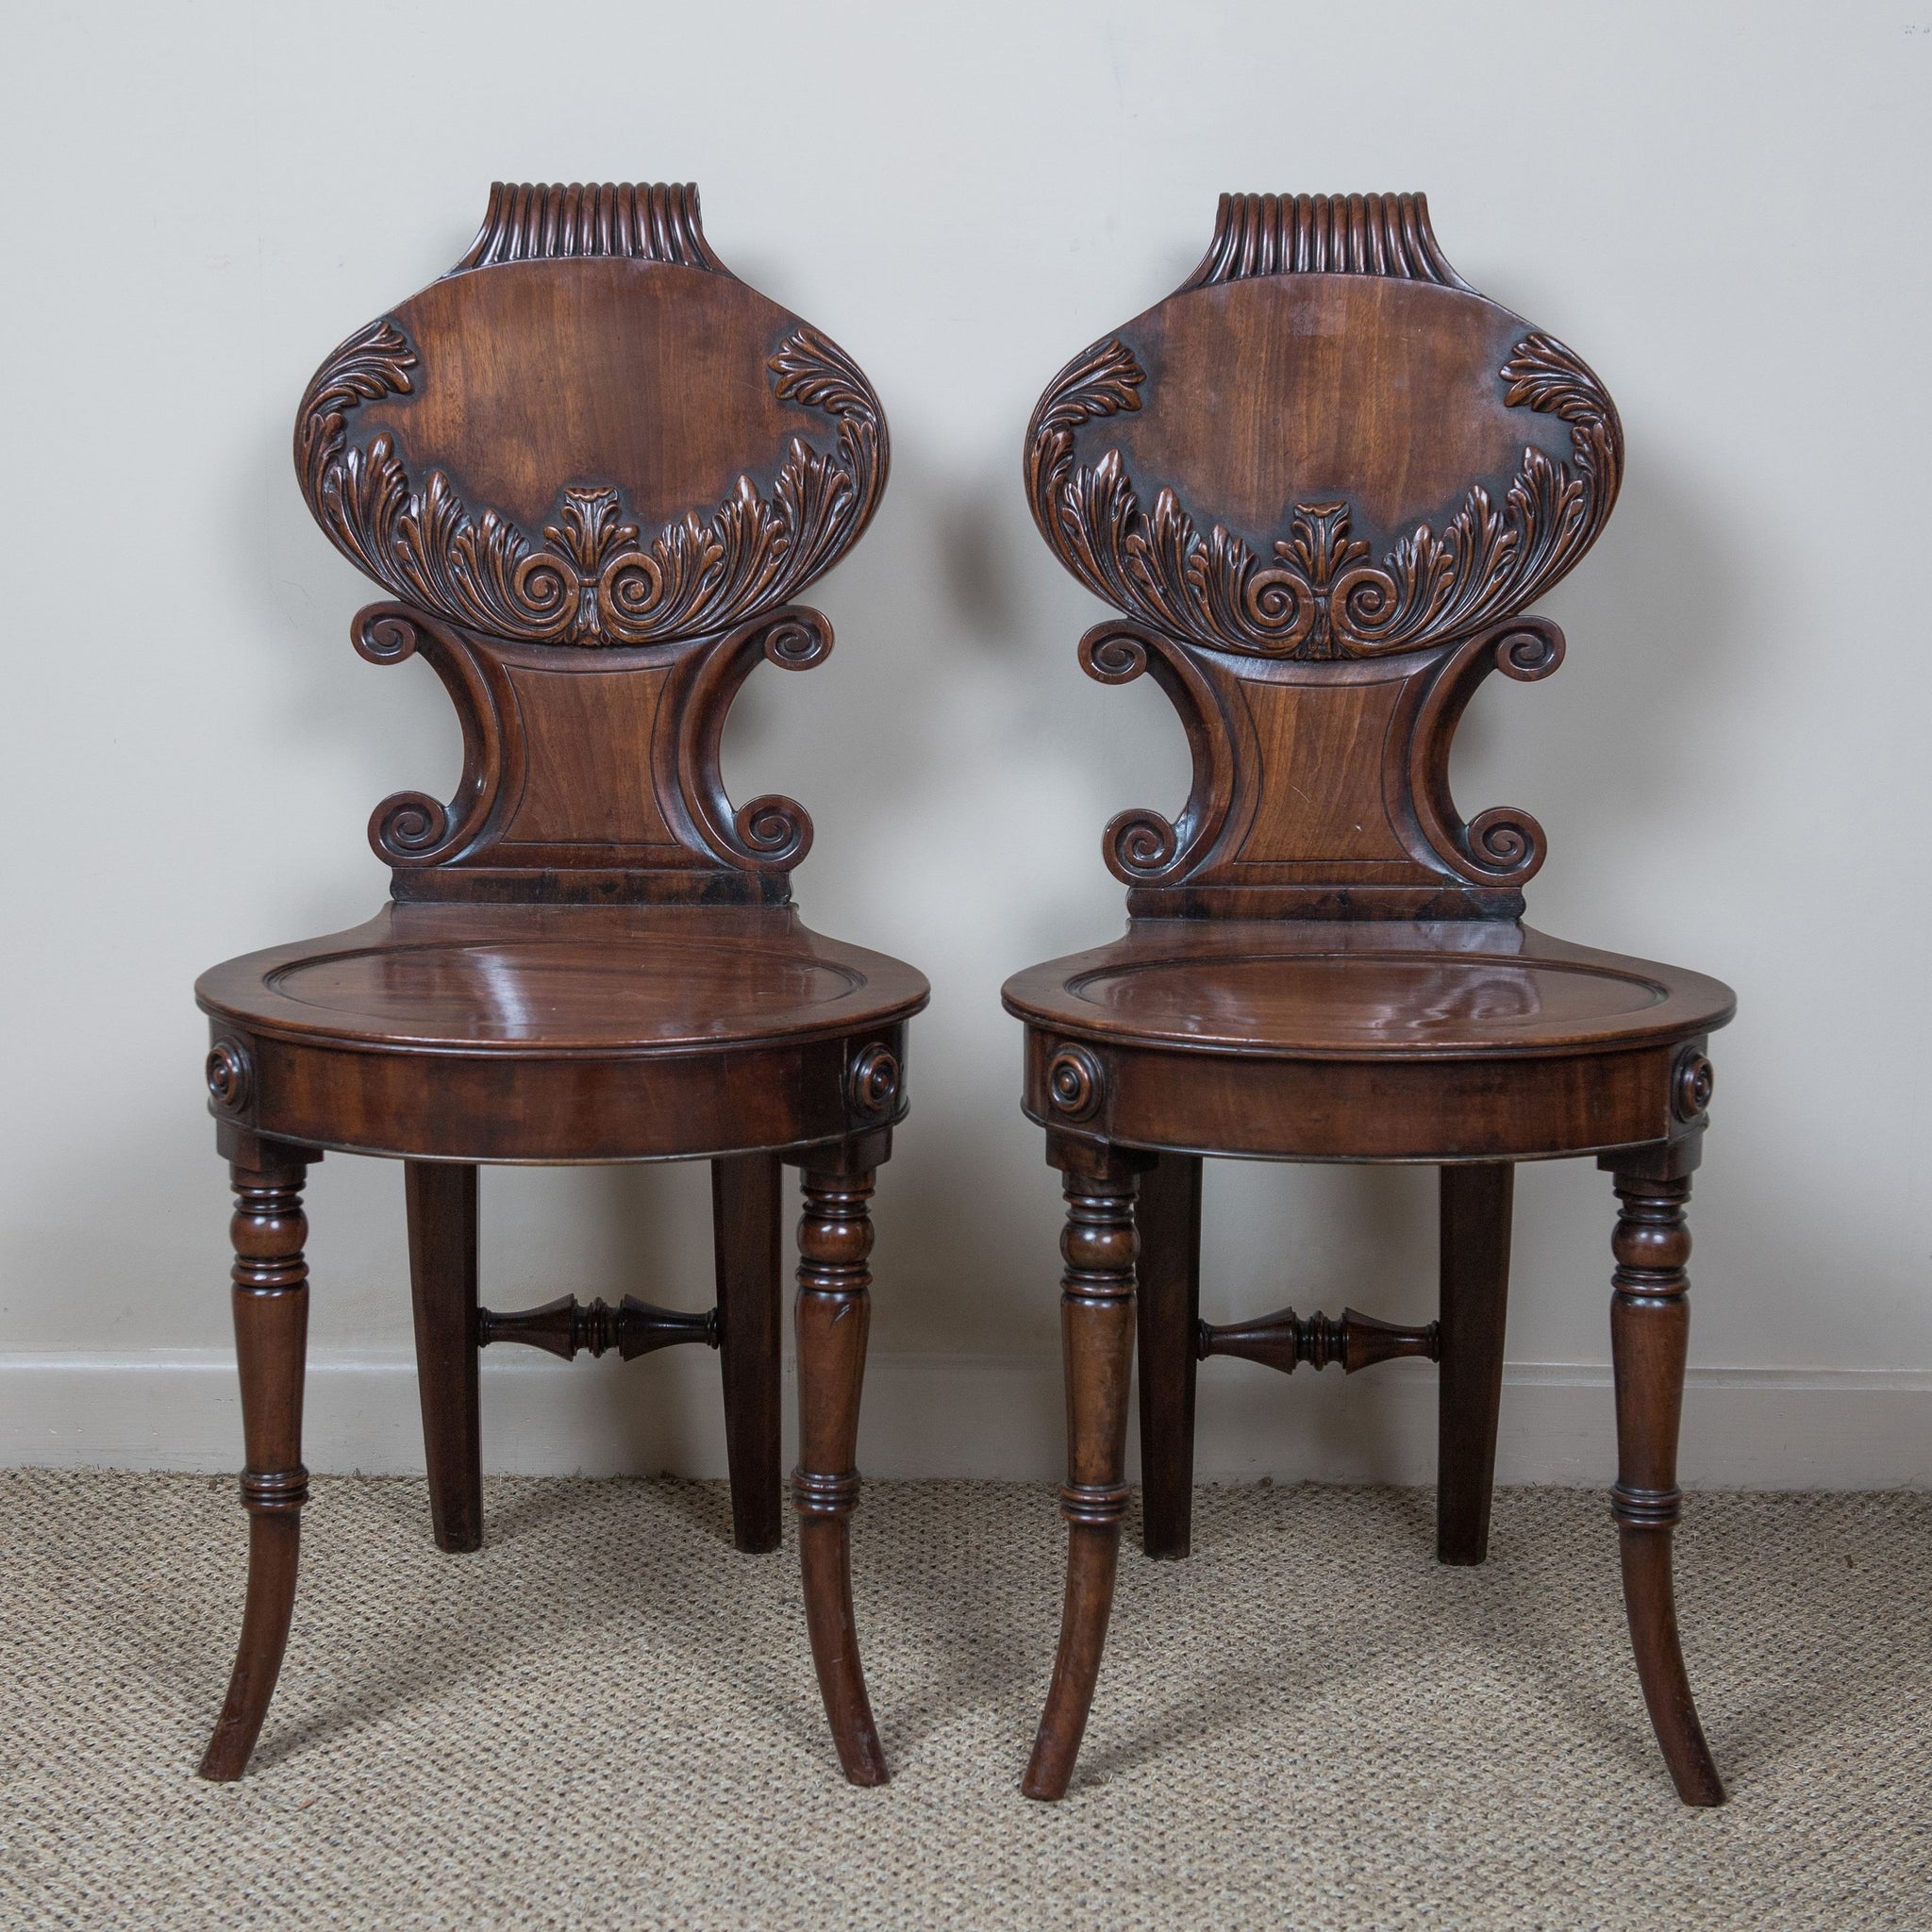 Pair of Hall Chairs